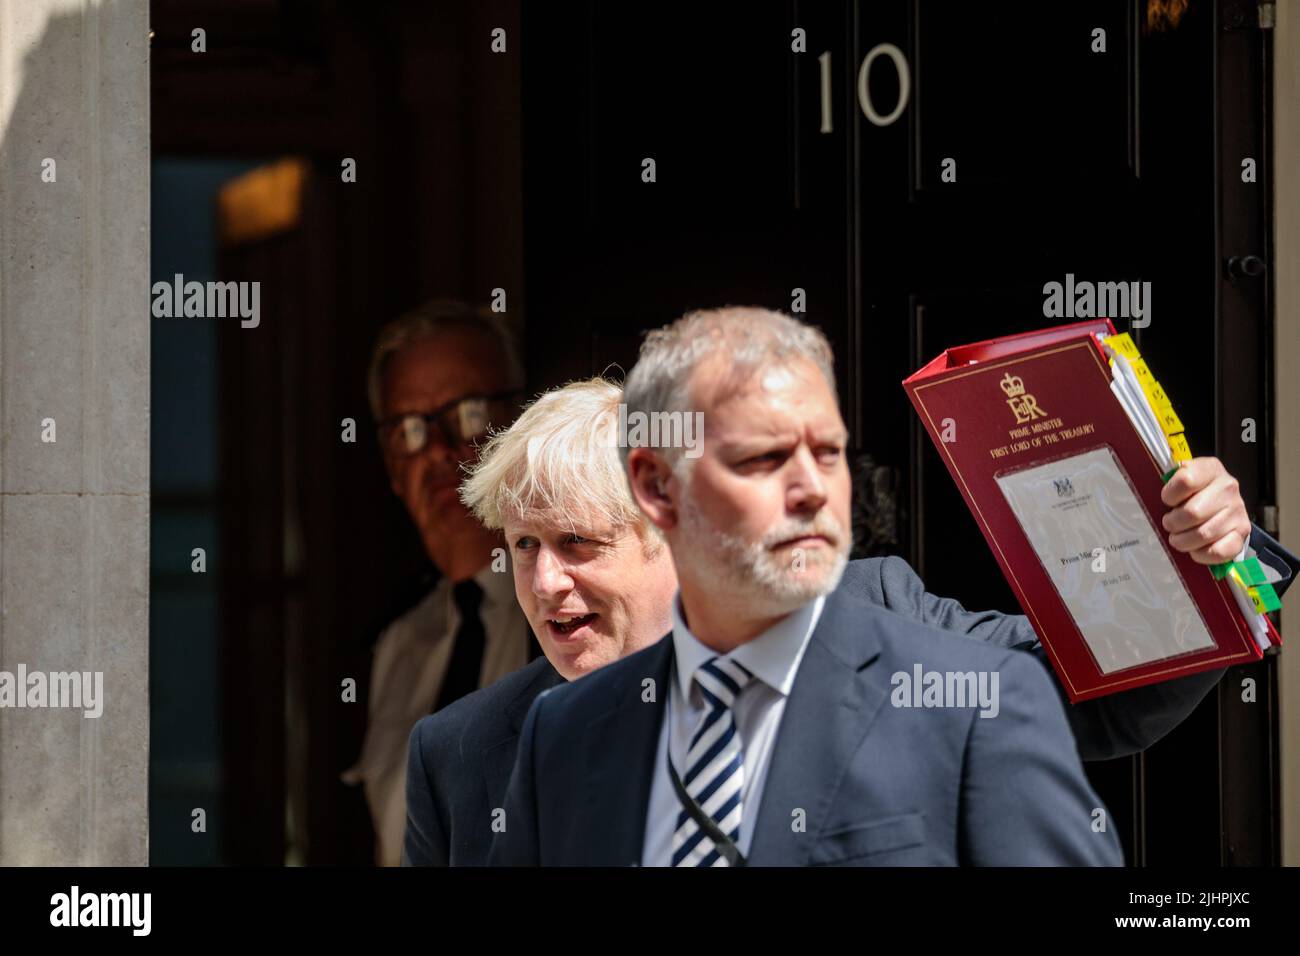 Downing Street, London, UK. 20th July 2022. Caretaker British Prime Minister, Boris Johnson, departs from Number 10 Downing Street to attend his last weekly Prime Minister's Questions (PMQ) session in the House of Commons following his resignation almost 2 weeks ago. Amanda Rose/Alamy Live News Stock Photo